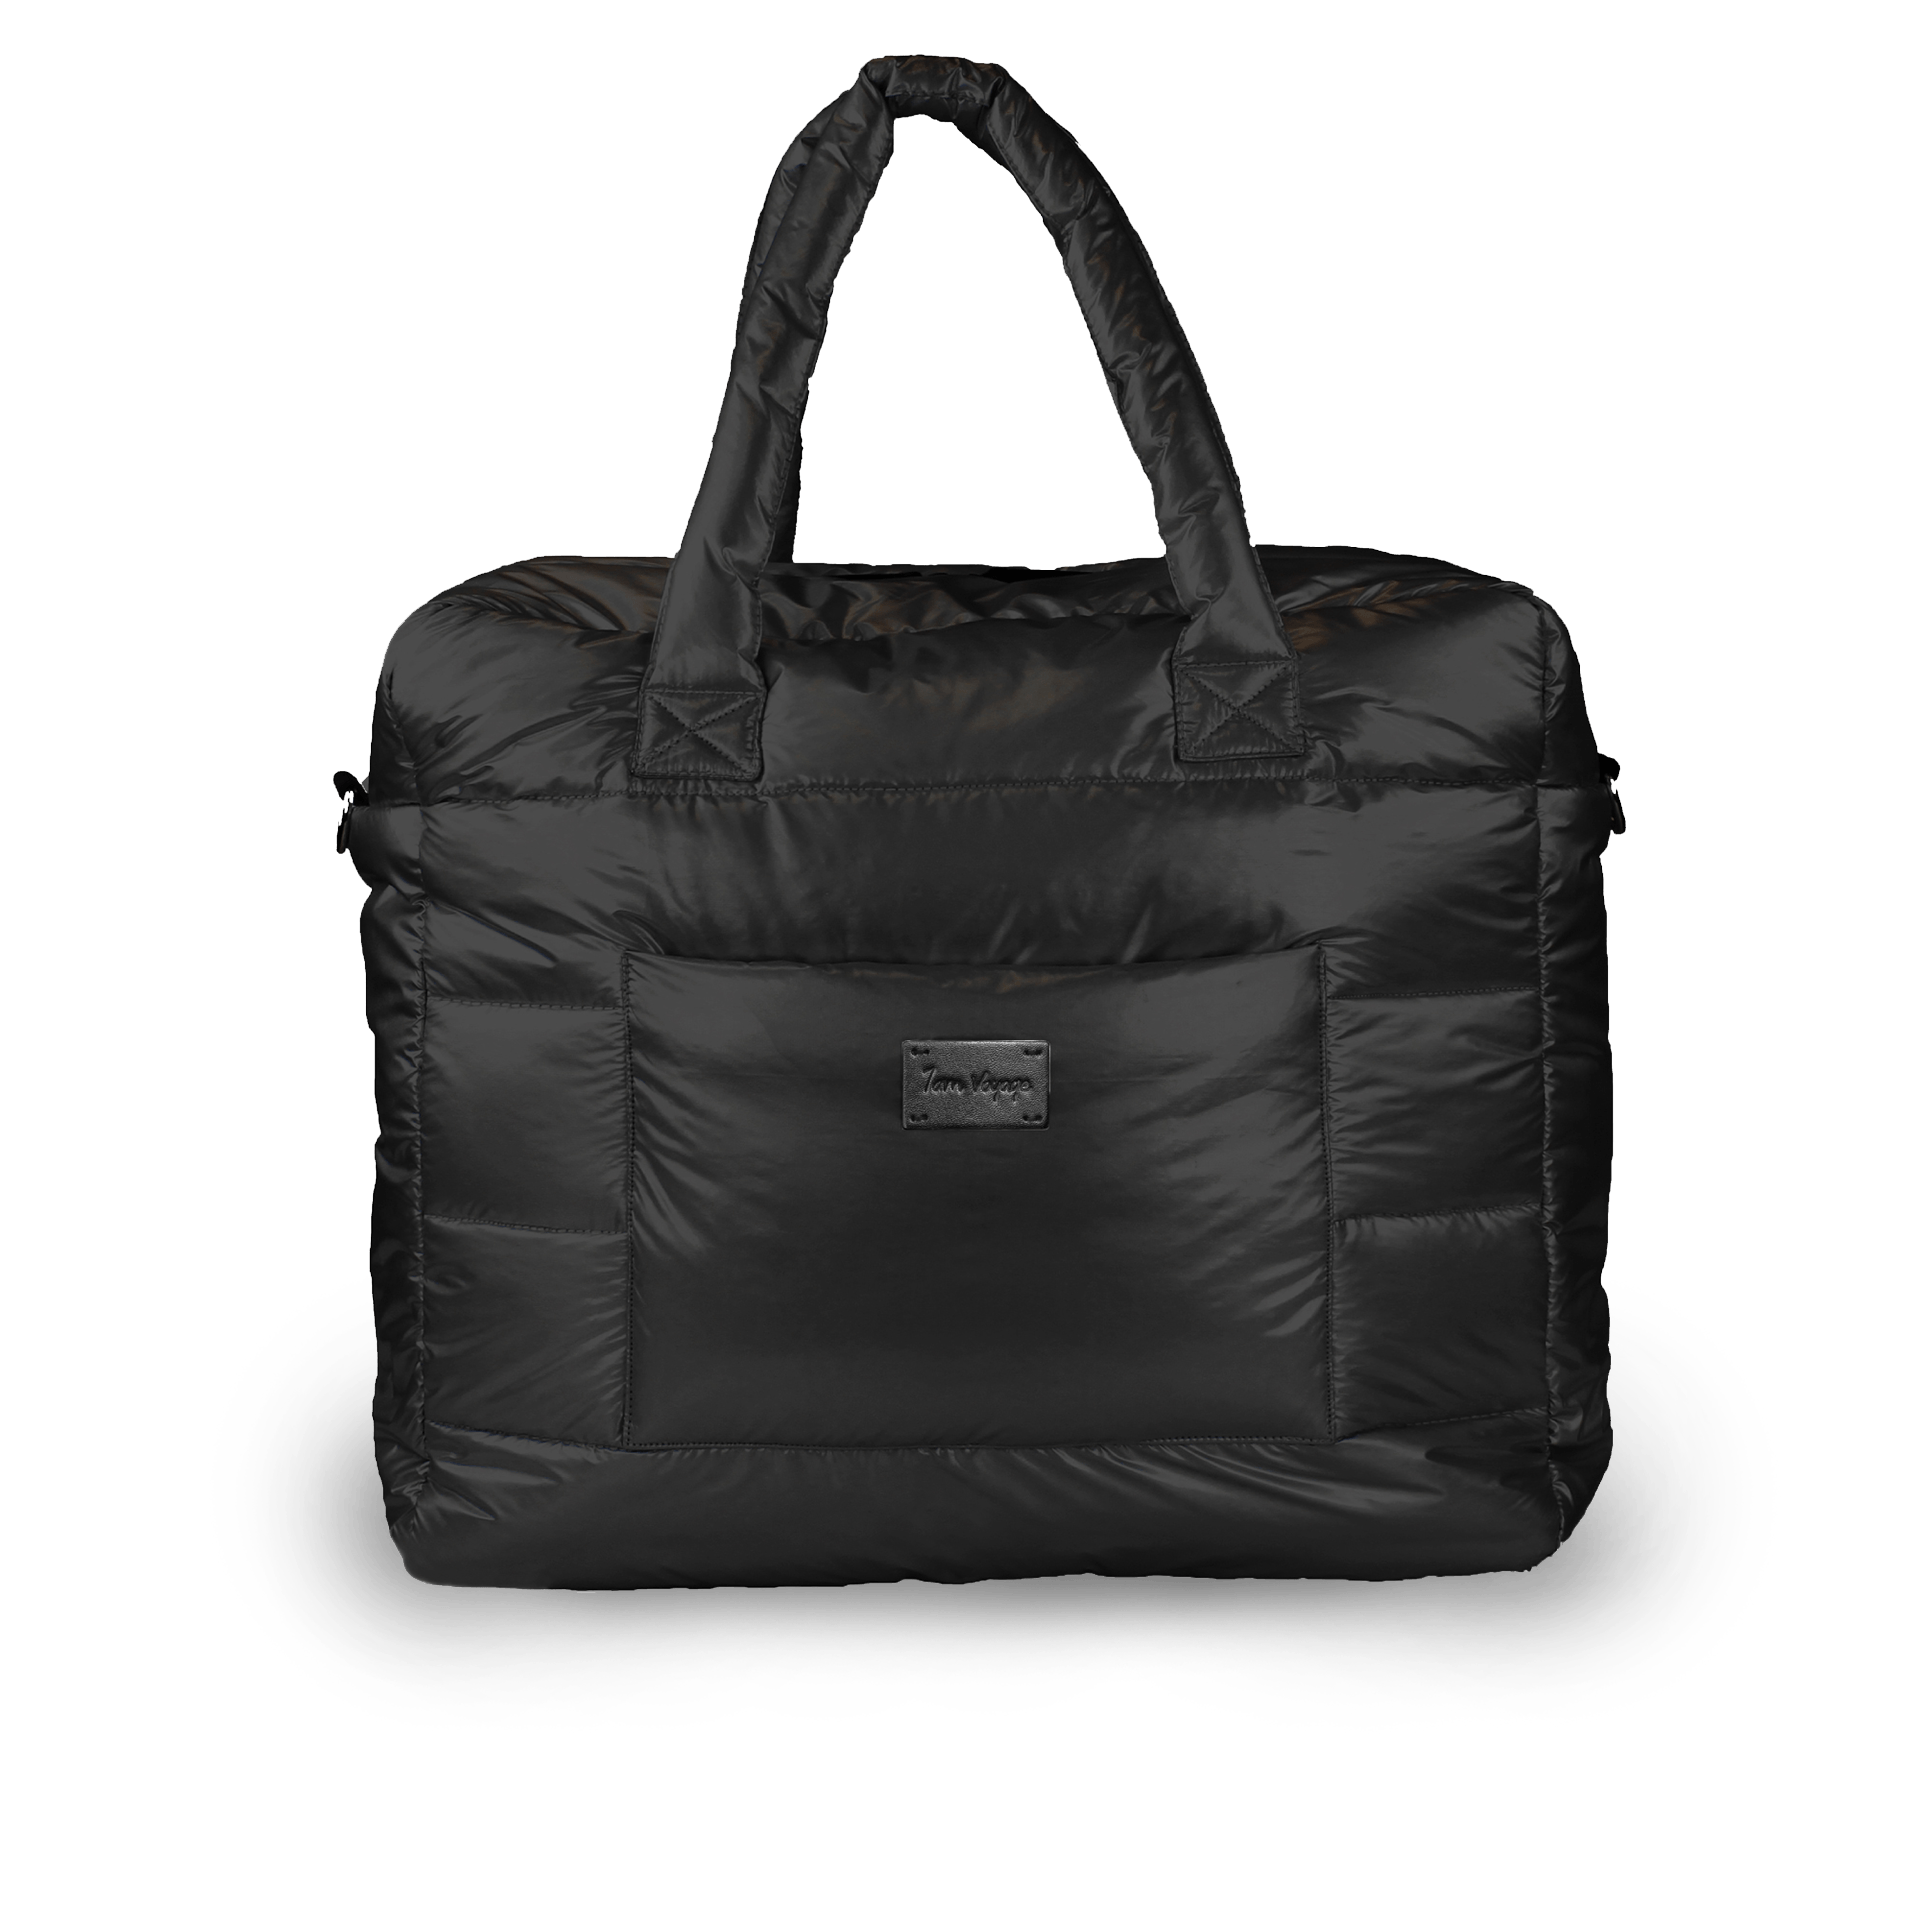 7 AM Plaza Weekend Diaper Bag - ANB Baby -$75 - $85